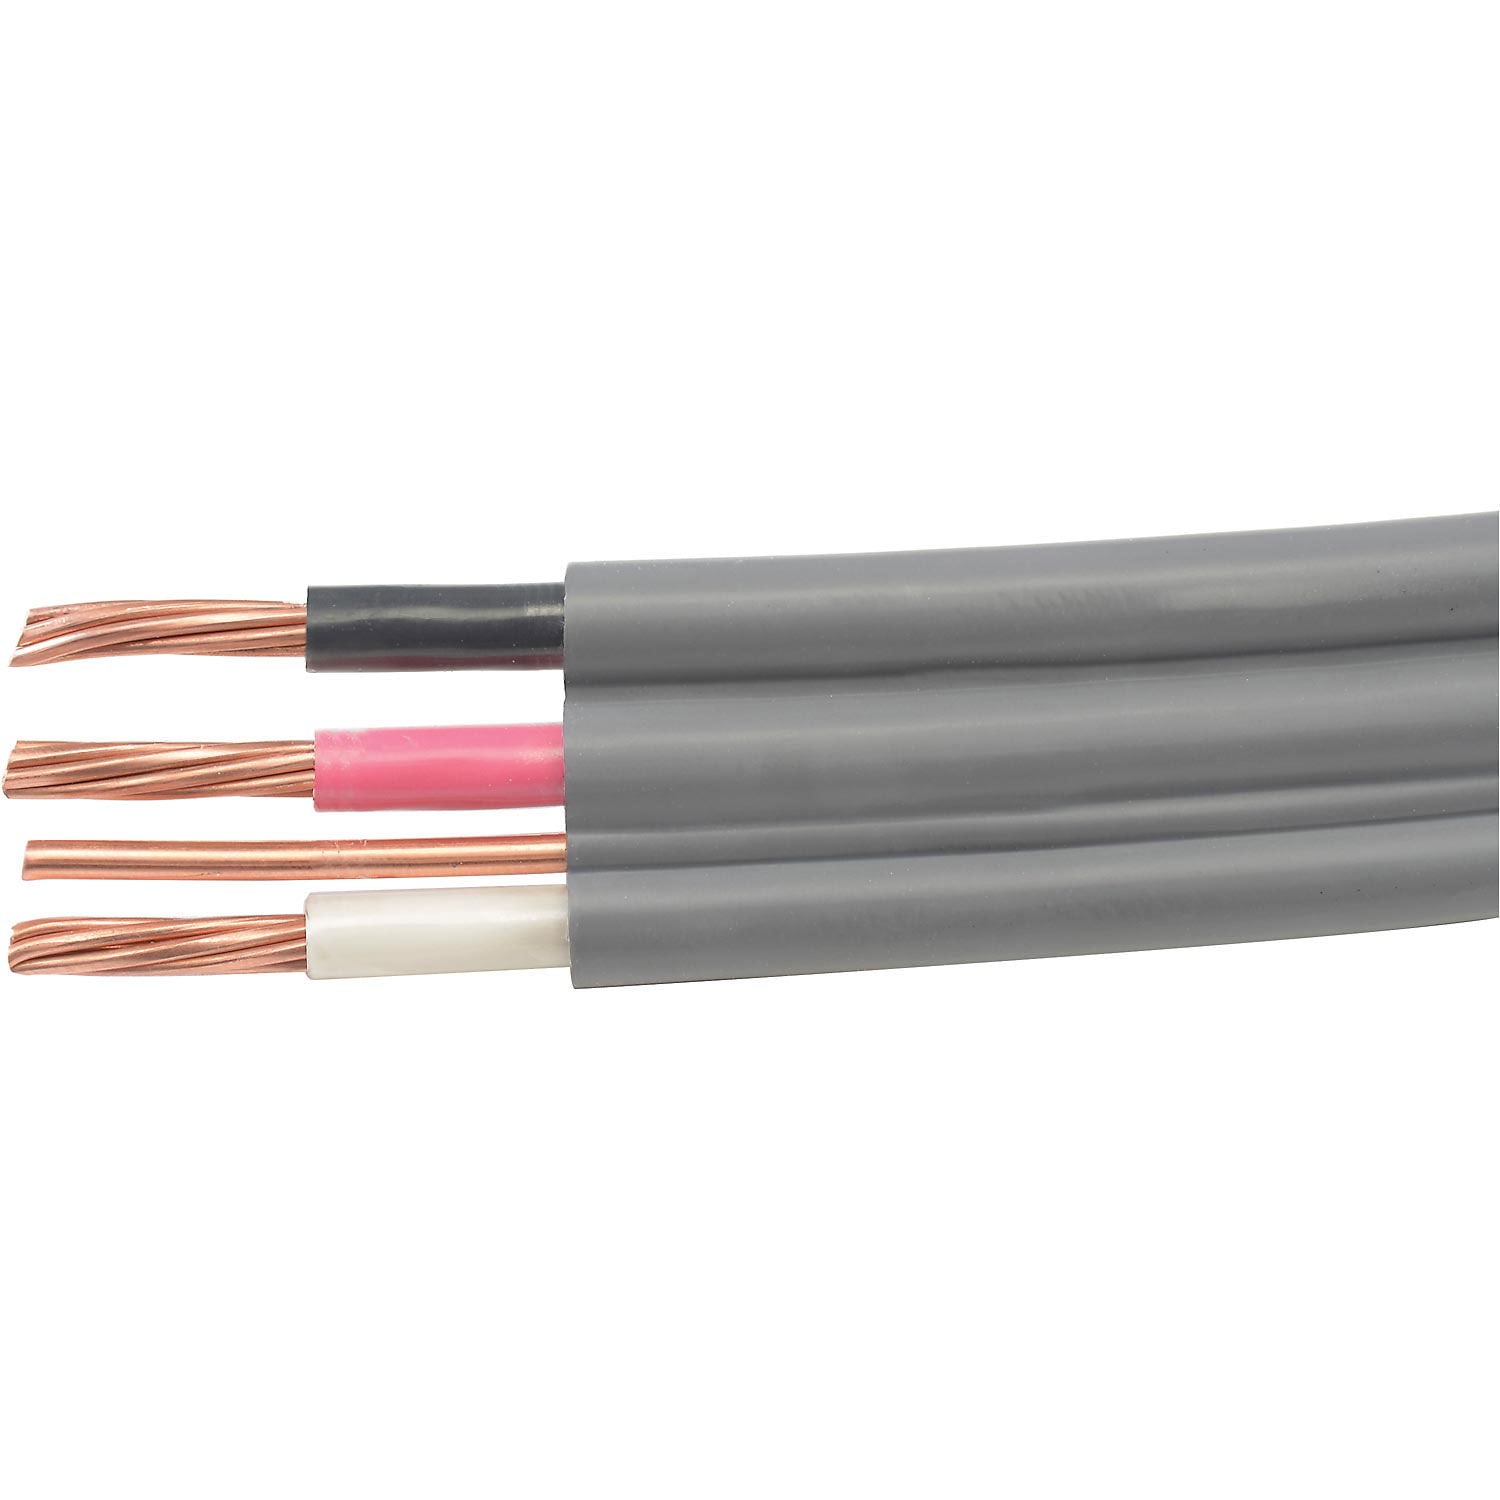 8/3 UF-B x 60' Southwire Underground Feeder Cable 